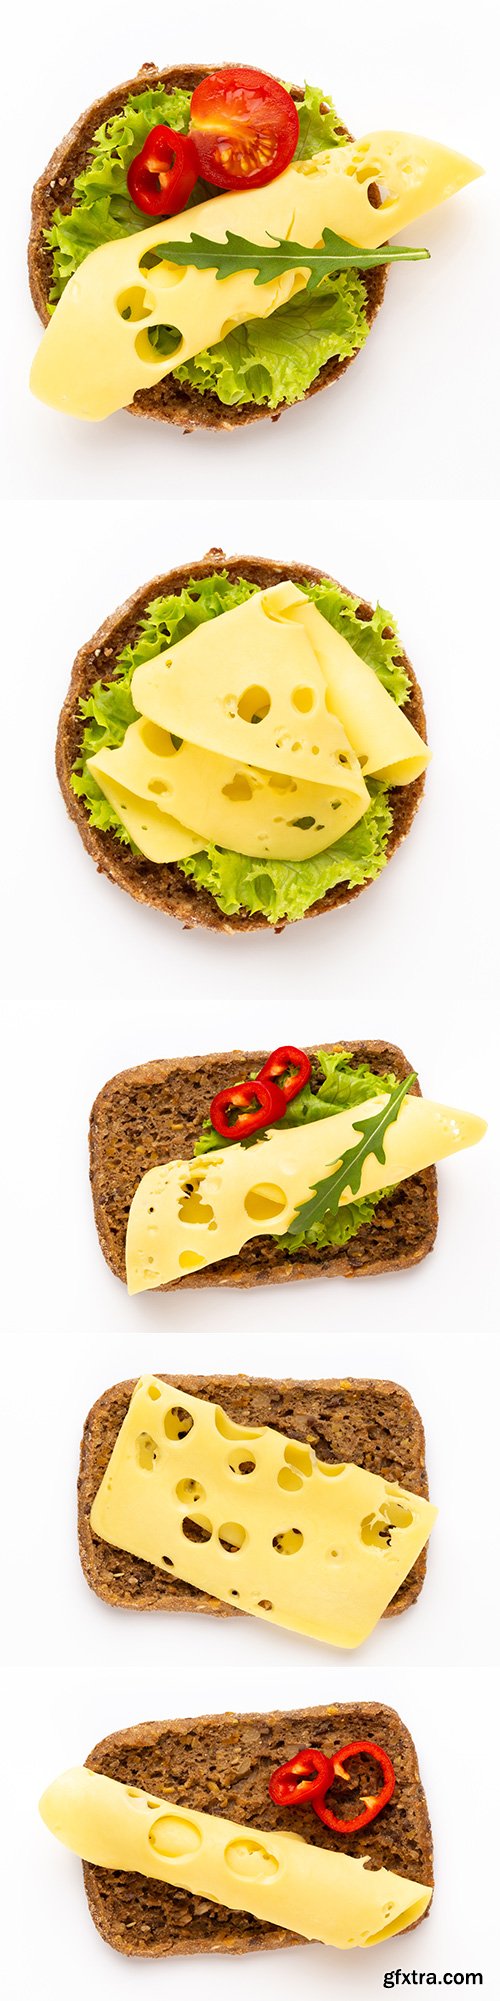 Sandwich With Lettuce Isolated - 6xJPGs